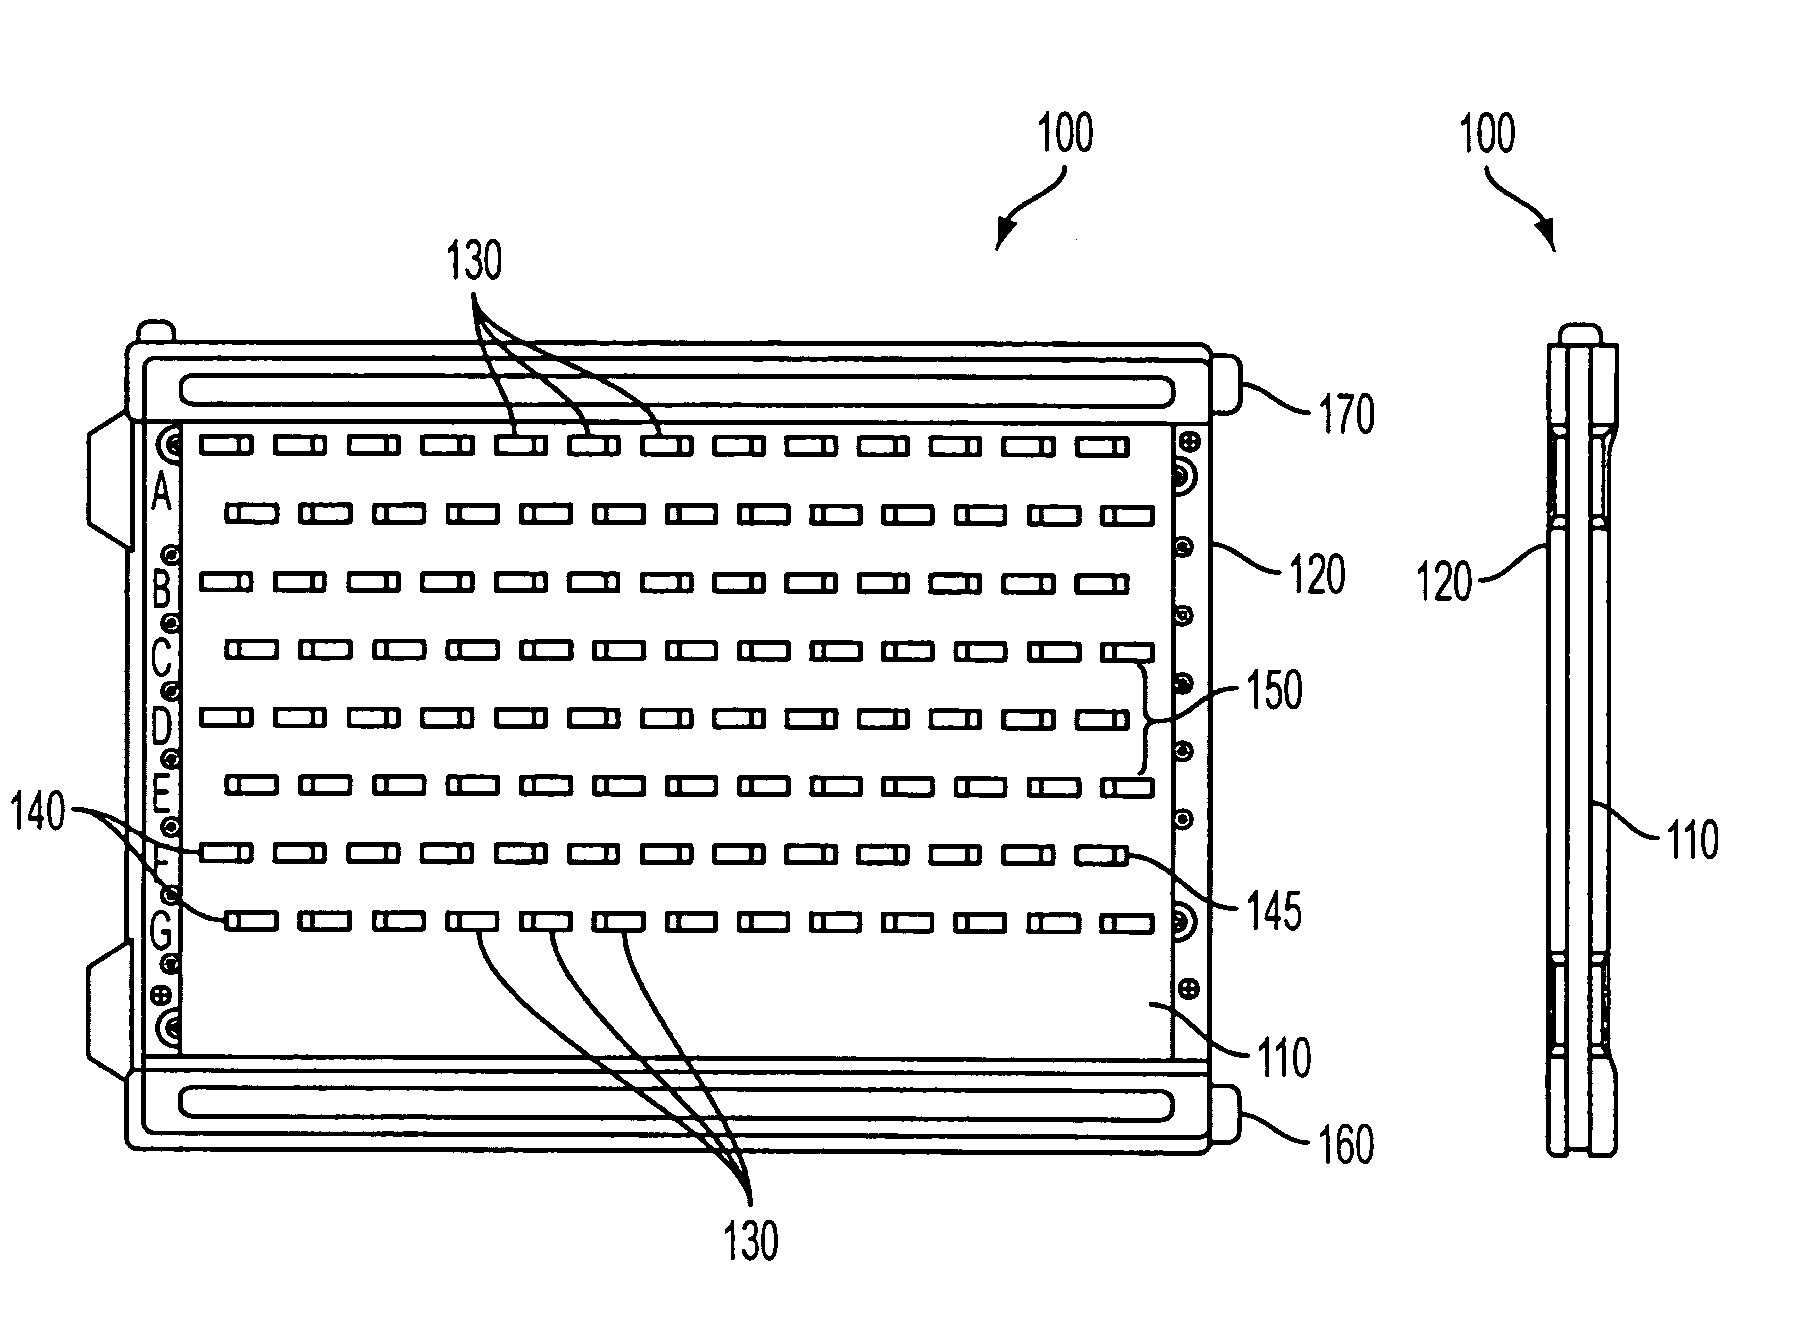 Composite compositions for electrophoresis